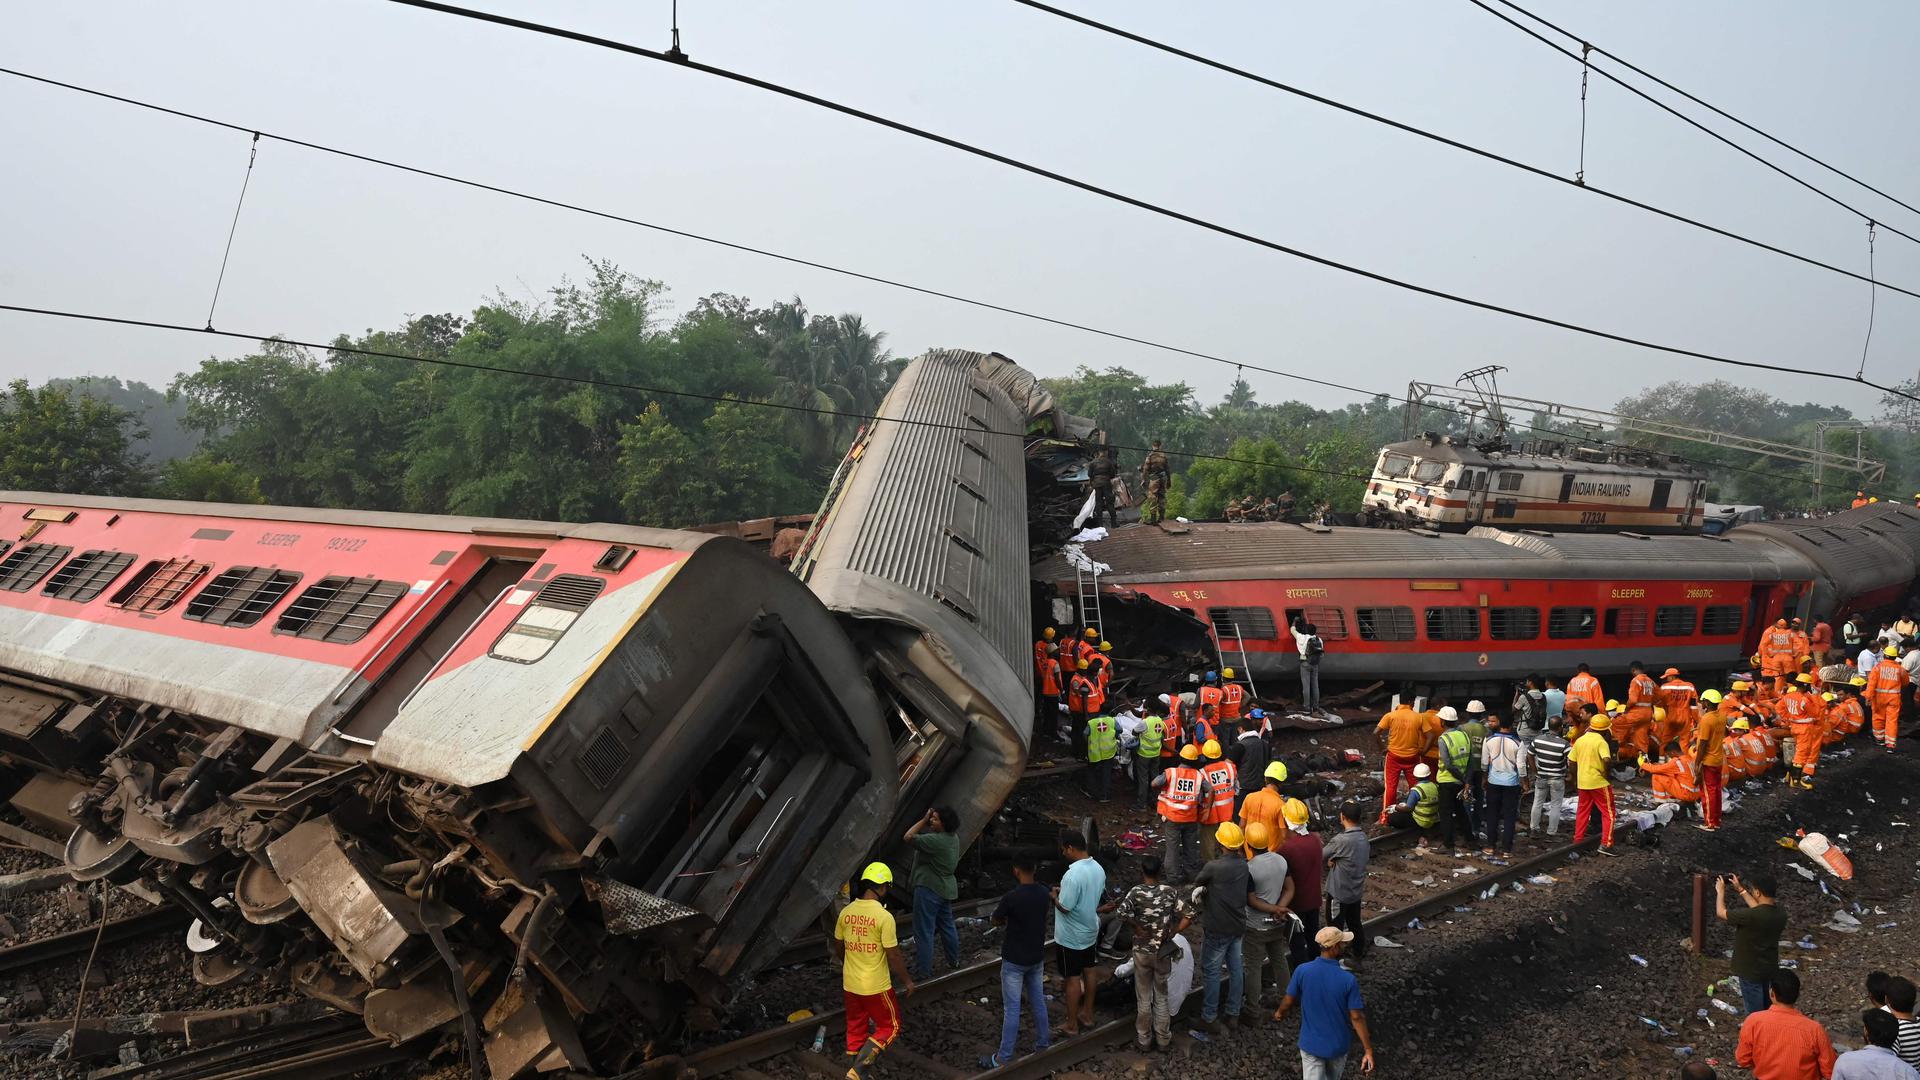 Rescue workers gather around damaged carriages during search for survivors at the accident site of a three-train collision near Balasore, about 200 km (125 miles) from the state capital Bhubaneswar in the eastern state of Odisha, on June 3, 2023. At least 288 people were killed and more than 850 injured in a horrific three-train collision in India, officials said on June 3, the country's deadliest rail accident in more than 20 years. (Photo by DIBYANGSHU SARKAR / AFP)